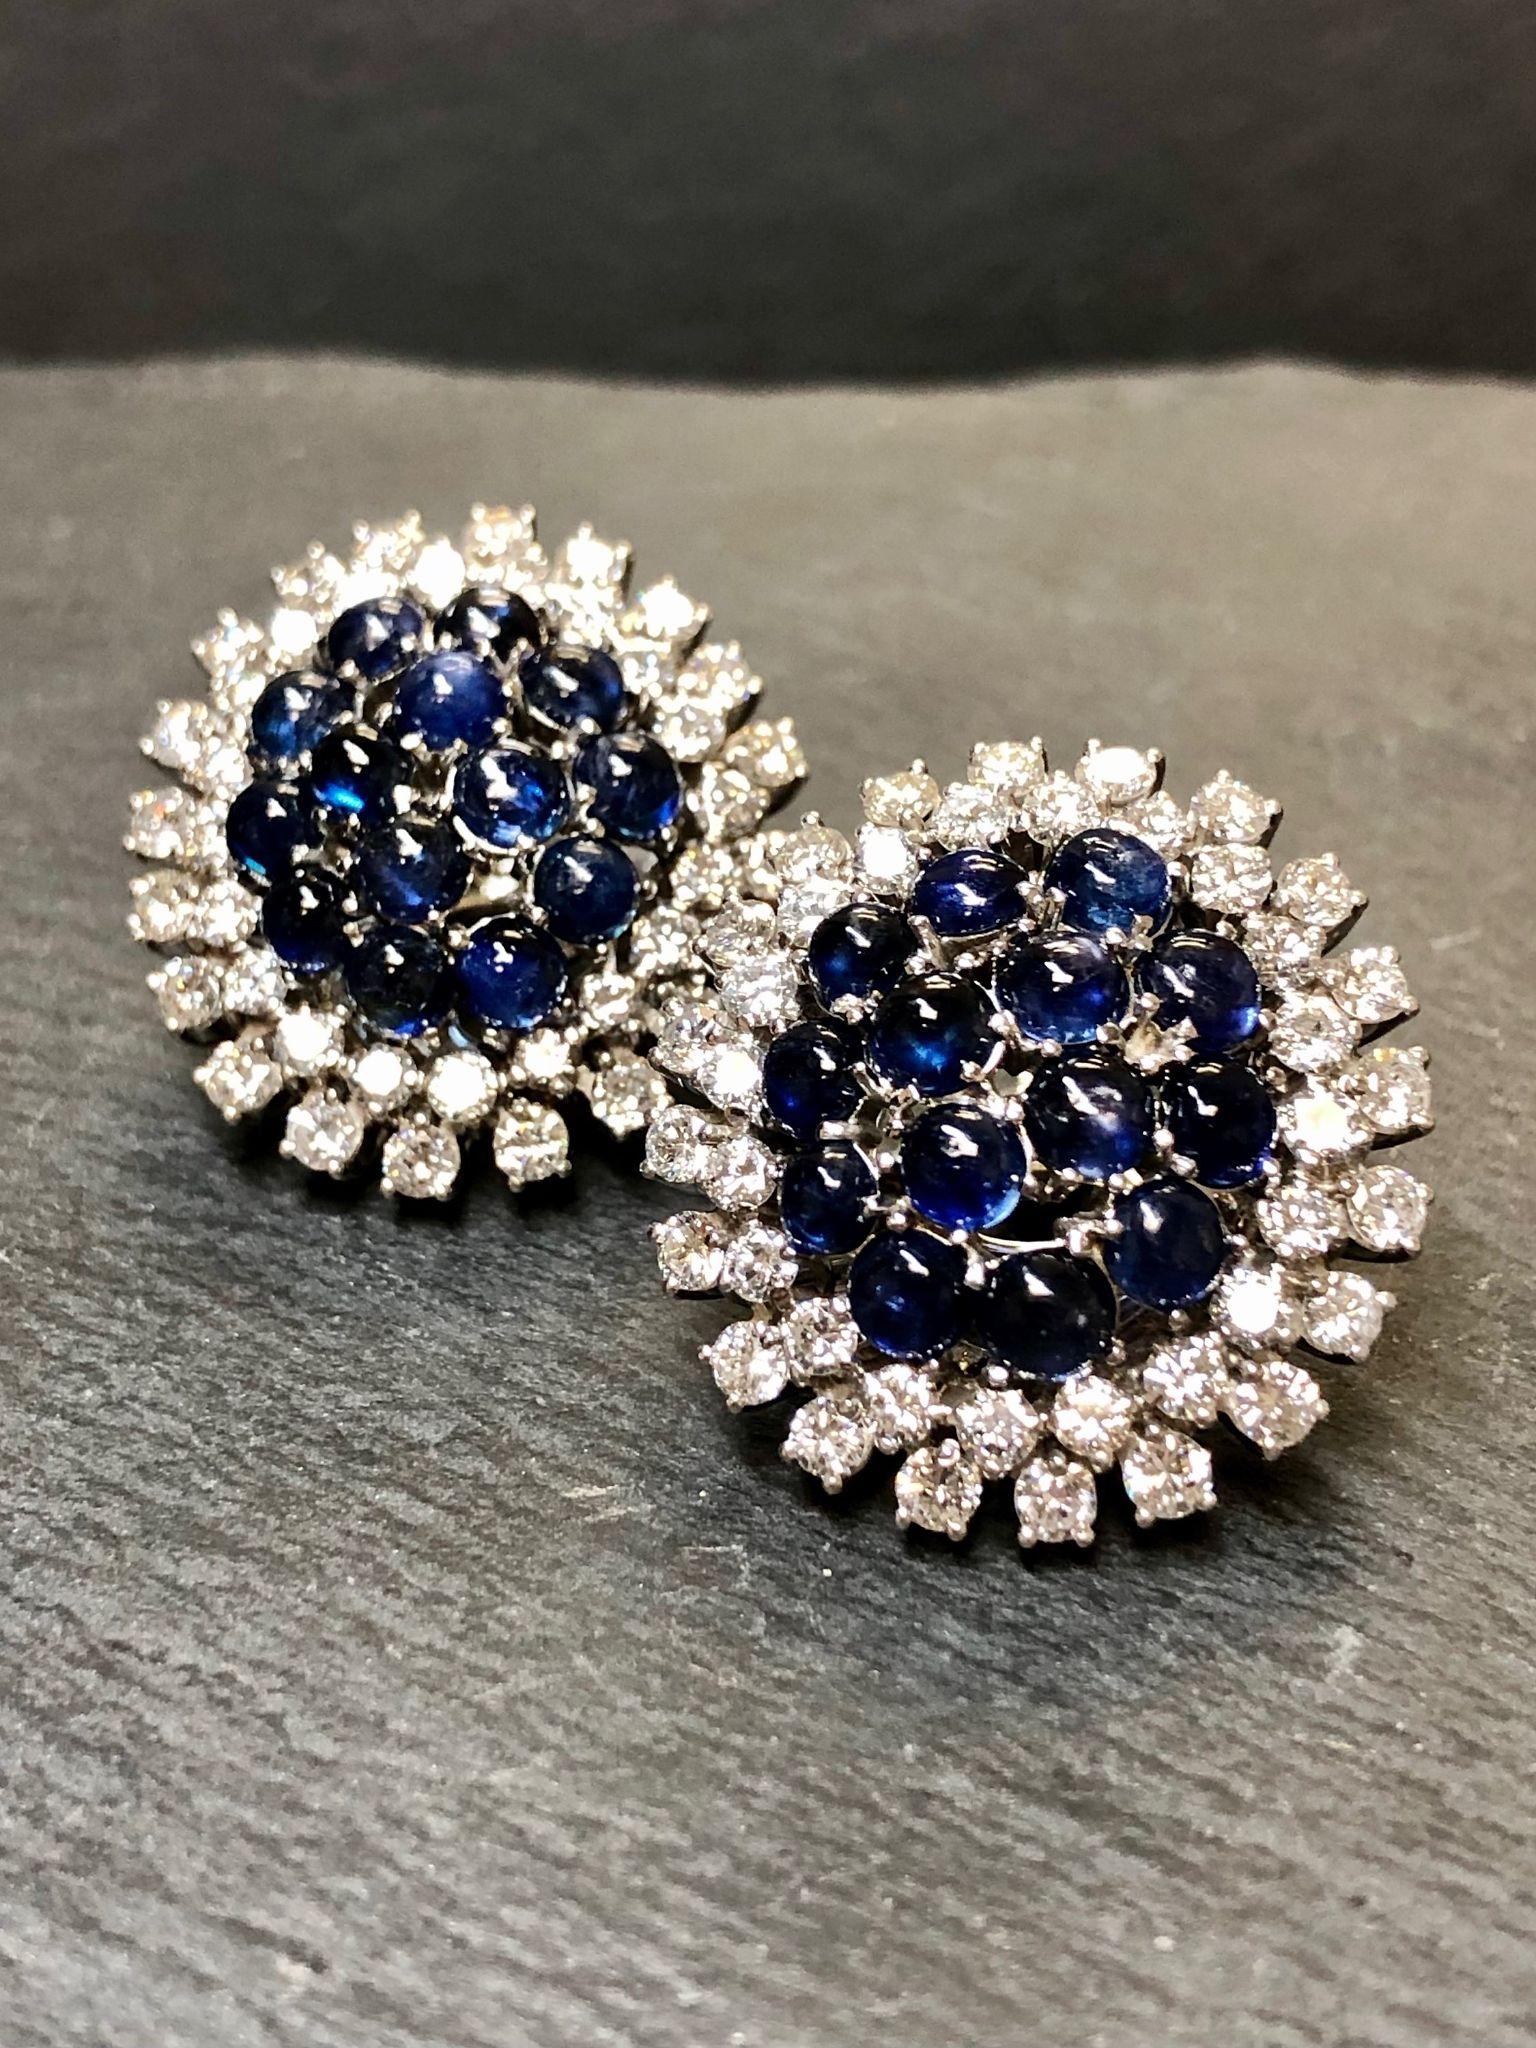 Cocktail earrings done in 18K white gold set with approximately 5.80cttw H-J color Vs clarity diamonds and 5.60cttw in natural cabochon sapphires.

Dimensions/Weight
1” in diameter. Weighs 13.5dwt.

Condition
All stones are secure and they are in